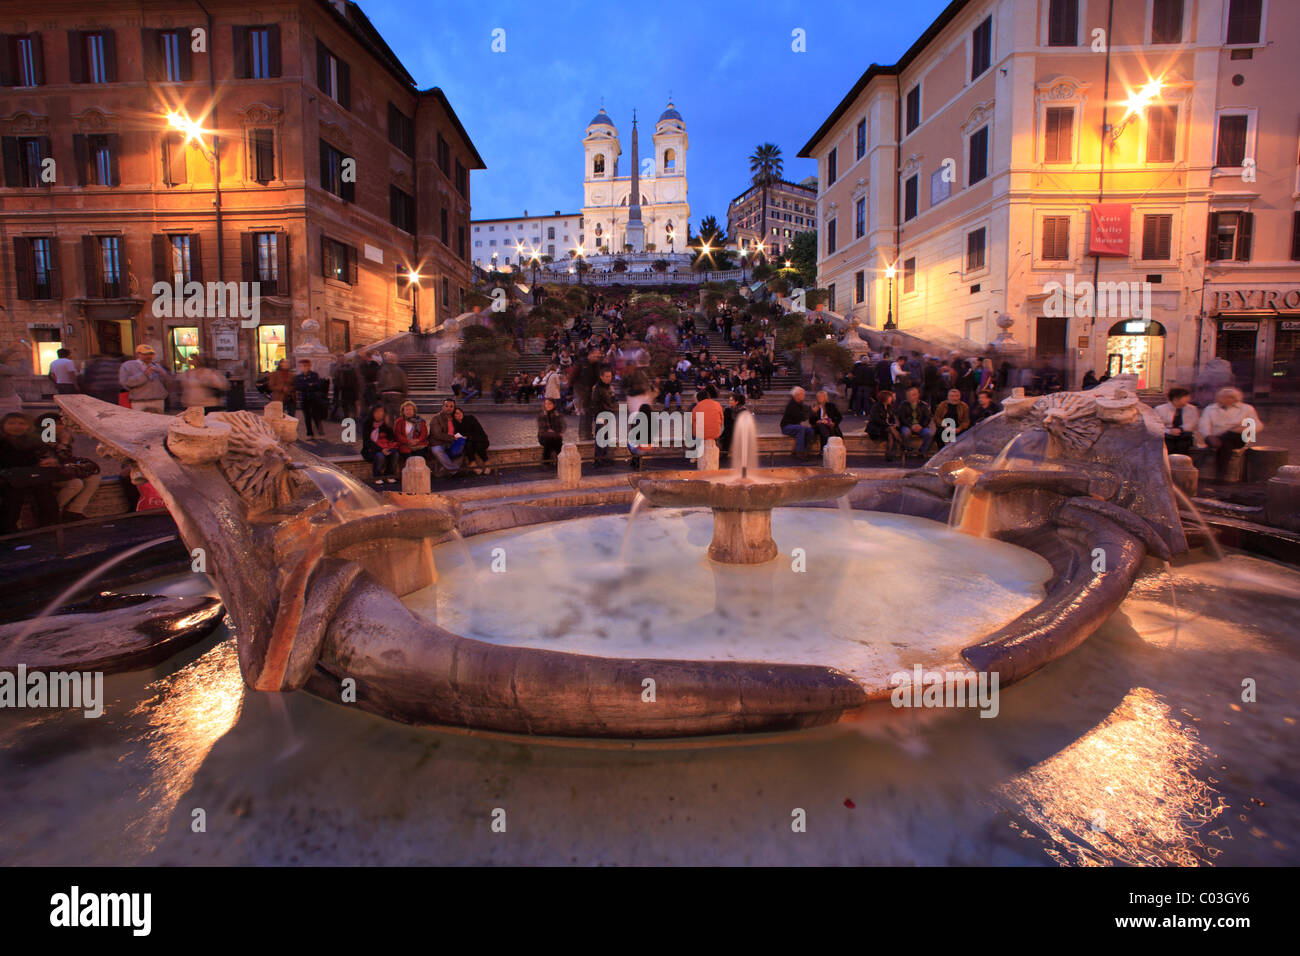 Piazza di Spagna, Spanish Steps, Rome, Italy, Europe Stock Photo